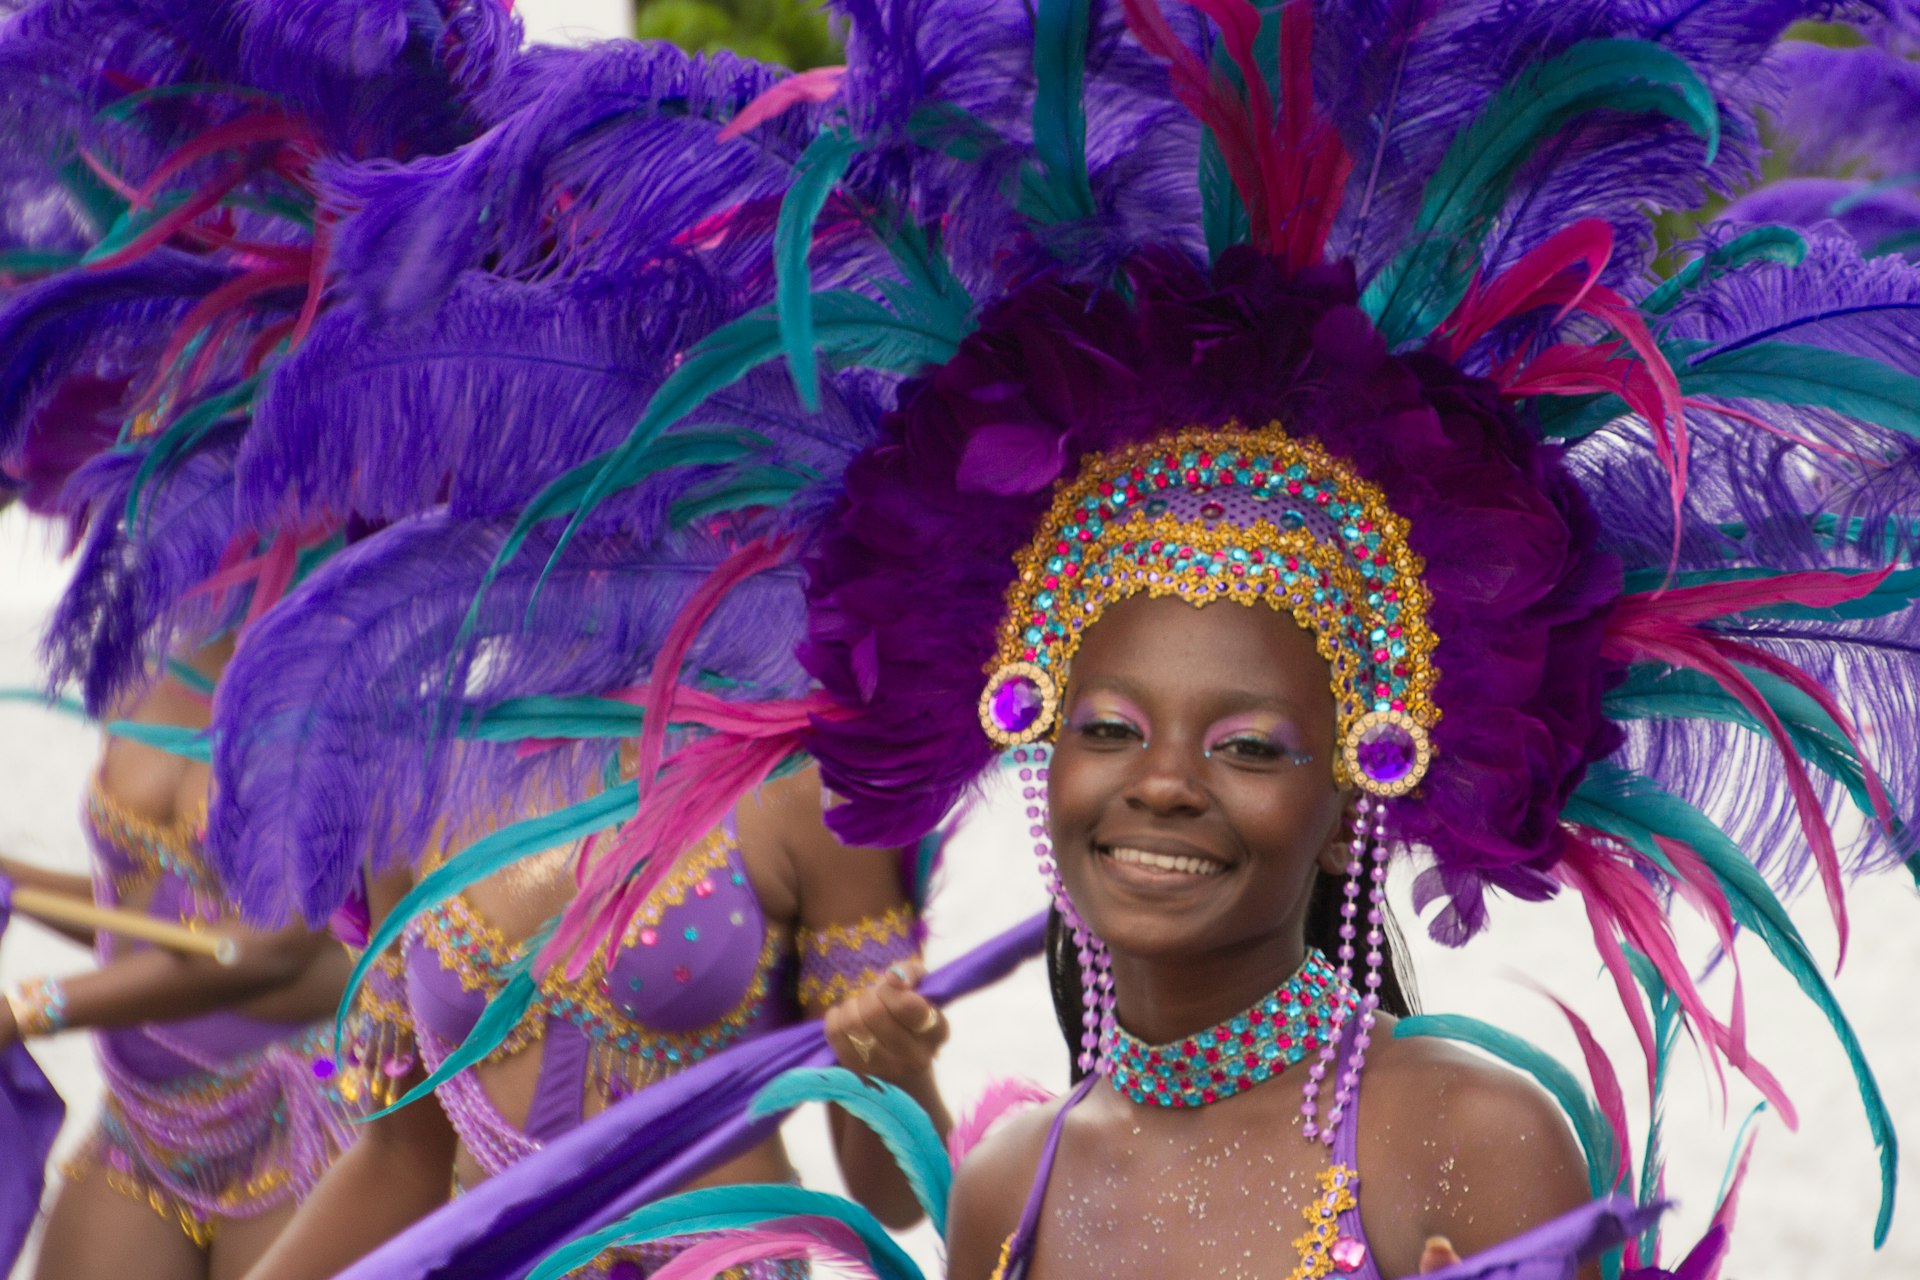 A smiling woman in a purple feathered headdress during Carnival in St Thomas, US Virgin Islands, USA